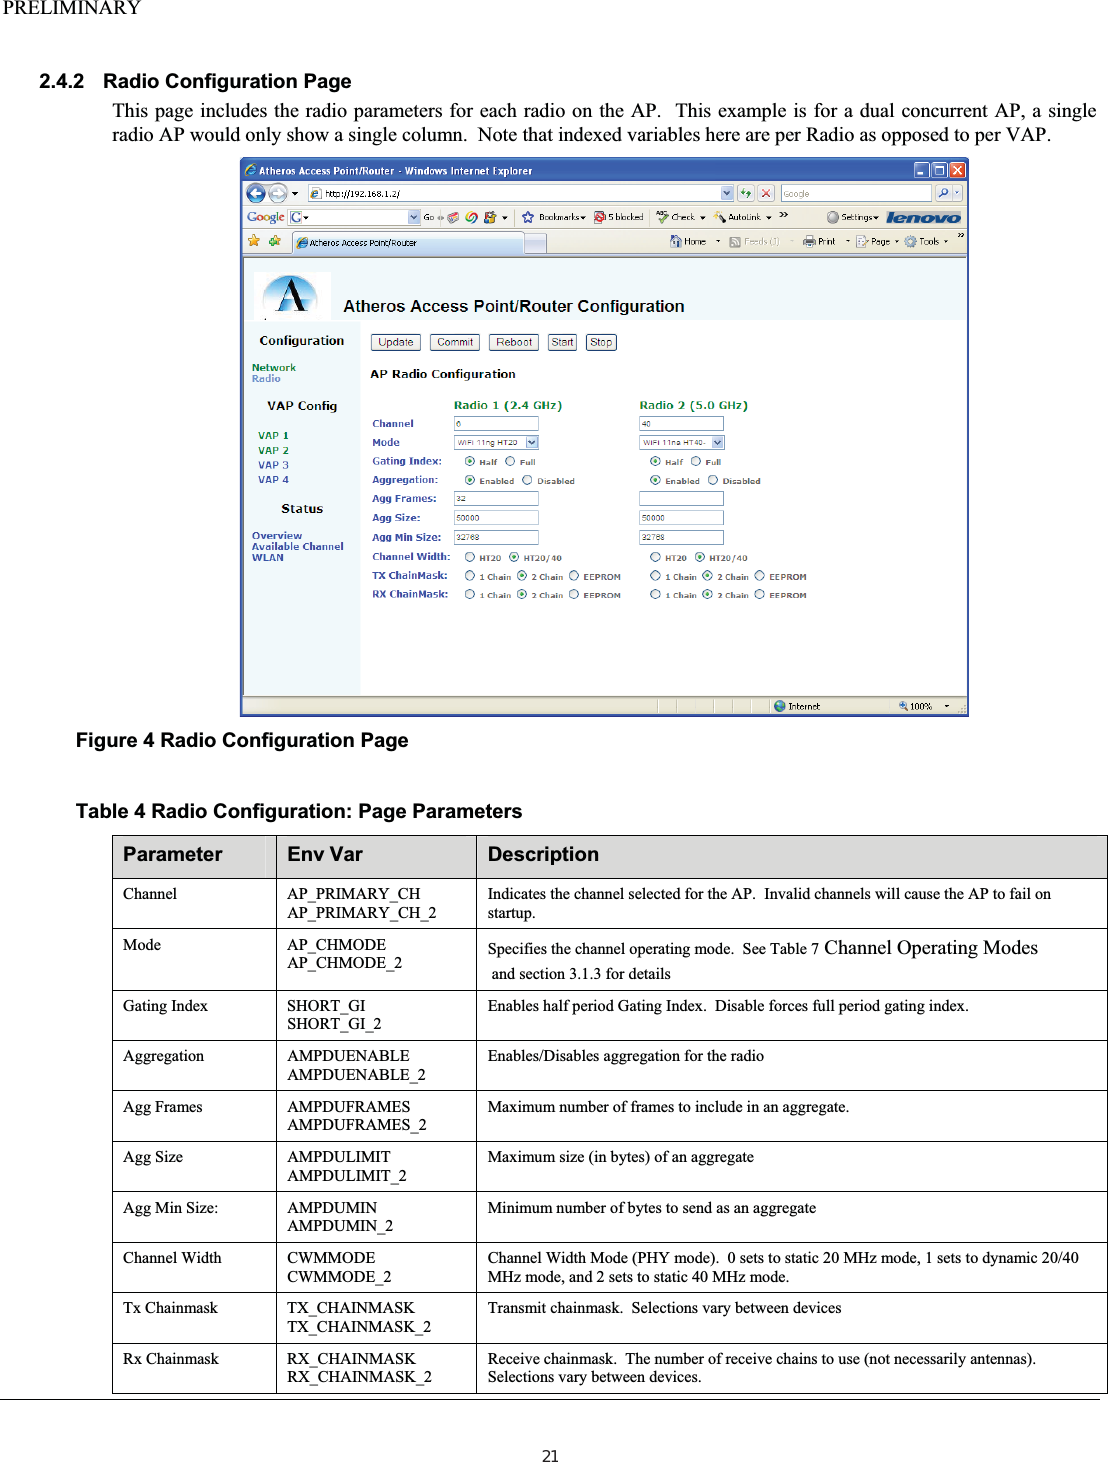 PRELIMINARY2.4.2 Radio Configuration Page This page includes the radio parameters for each radio on the AP.  This example is for a dual concurrent AP, a single radio AP would only show a single column.  Note that indexed variables here are per Radio as opposed to per VAP. Figure 4 Radio Configuration Page Table 4 Radio Configuration: Page Parameters Parameter Env Var  Description Channel AP_PRIMARY_CH AP_PRIMARY_CH_2 Indicates the channel selected for the AP.  Invalid channels will cause the AP to fail on startup. Mode AP_CHMODE AP_CHMODE_2  Specifies the channel operating mode.  See Table 7 Channel Operating Modes  and section 3.1.3 for details Gating Index  SHORT_GI SHORT_GI_2Enables half period Gating Index.  Disable forces full period gating index. Aggregation AMPDUENABLE AMPDUENABLE_2 Enables/Disables aggregation for the radio Agg Frames  AMPDUFRAMES AMPDUFRAMES_2 Maximum number of frames to include in an aggregate. Agg Size  AMPDULIMIT AMPDULIMIT_2 Maximum size (in bytes) of an aggregate Agg Min Size:  AMPDUMIN AMPDUMIN_2 Minimum number of bytes to send as an aggregate Channel Width  CWMMODE CWMMODE_2 Channel Width Mode (PHY mode).  0 sets to static 20 MHz mode, 1 sets to dynamic 20/40 MHz mode, and 2 sets to static 40 MHz mode. Tx Chainmask  TX_CHAINMASK TX_CHAINMASK_2 Transmit chainmask.  Selections vary between devices Rx Chainmask  RX_CHAINMASK RX_CHAINMASK_2 Receive chainmask.  The number of receive chains to use (not necessarily antennas).  Selections vary between devices. 21